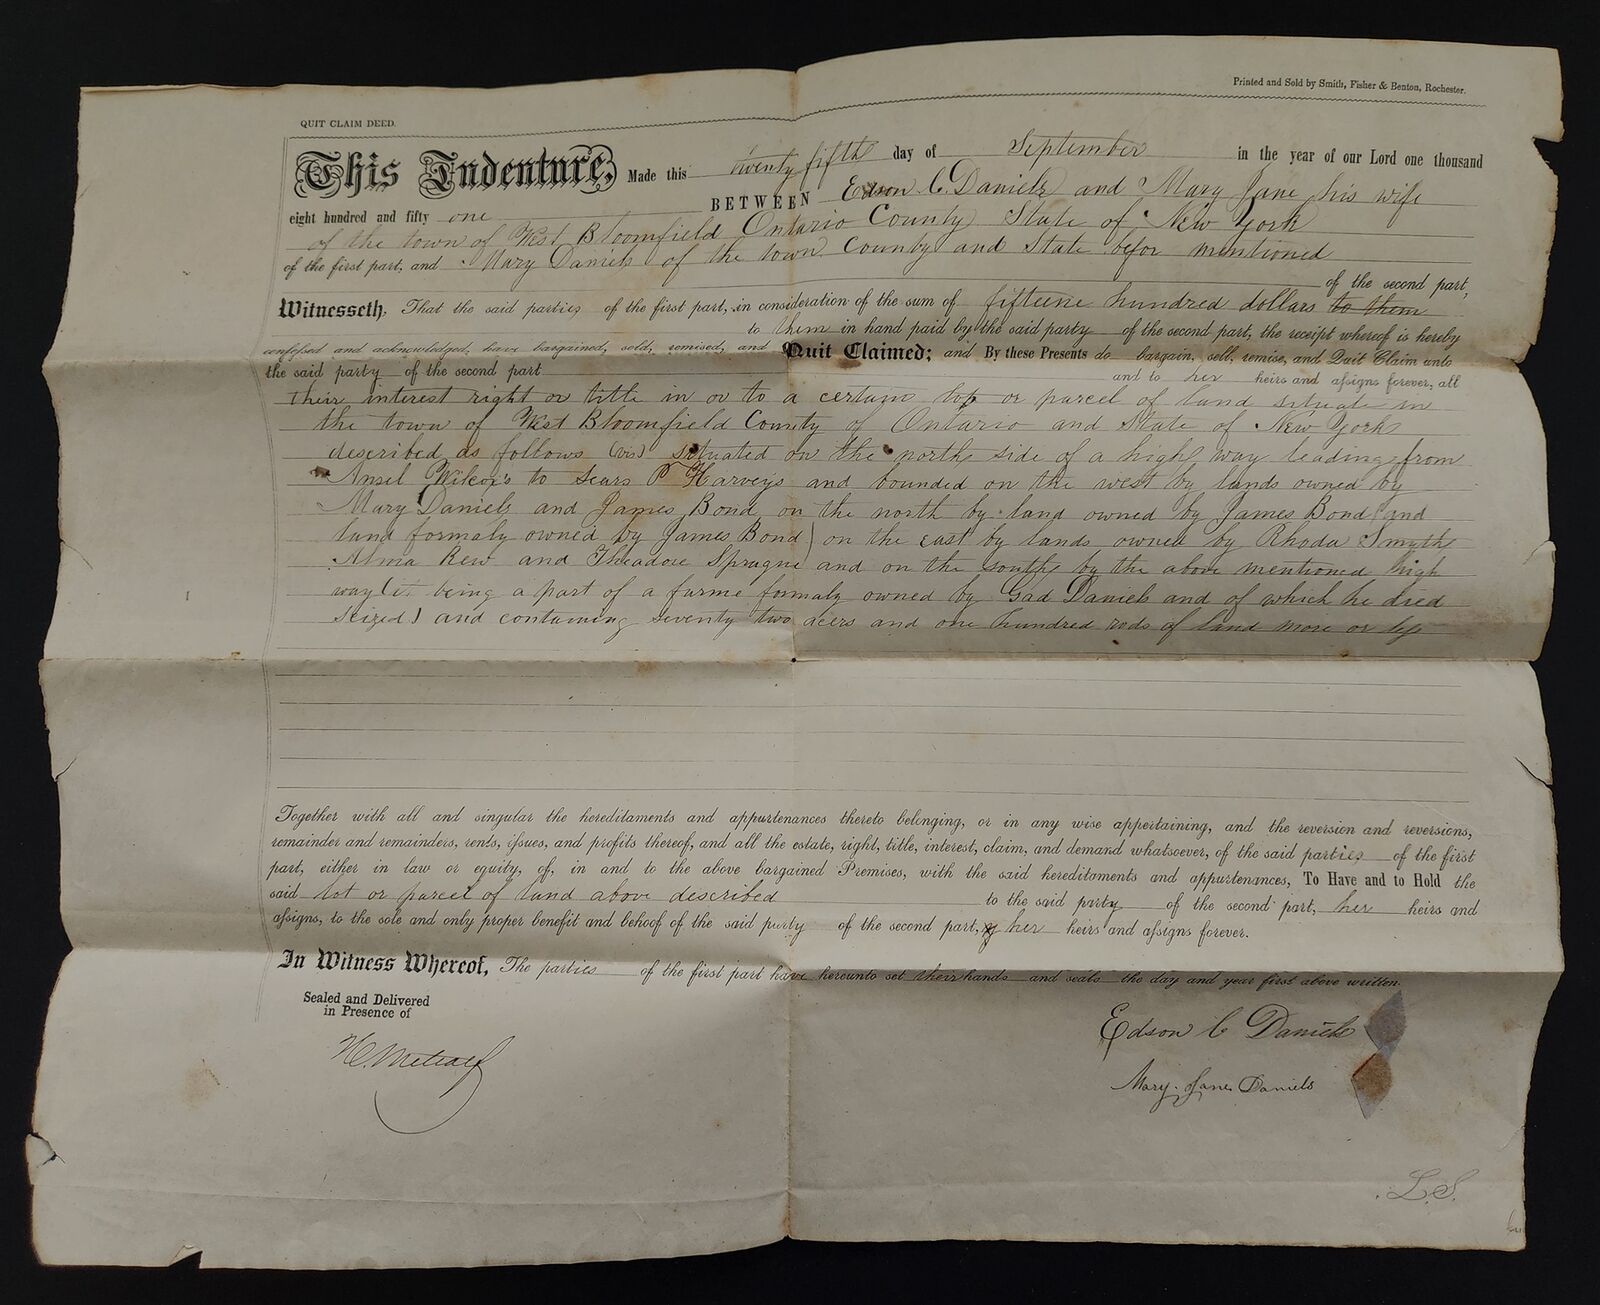 1851 antique DEED EDSON DANIELS mary jane west bloomfield ontario ny MARY